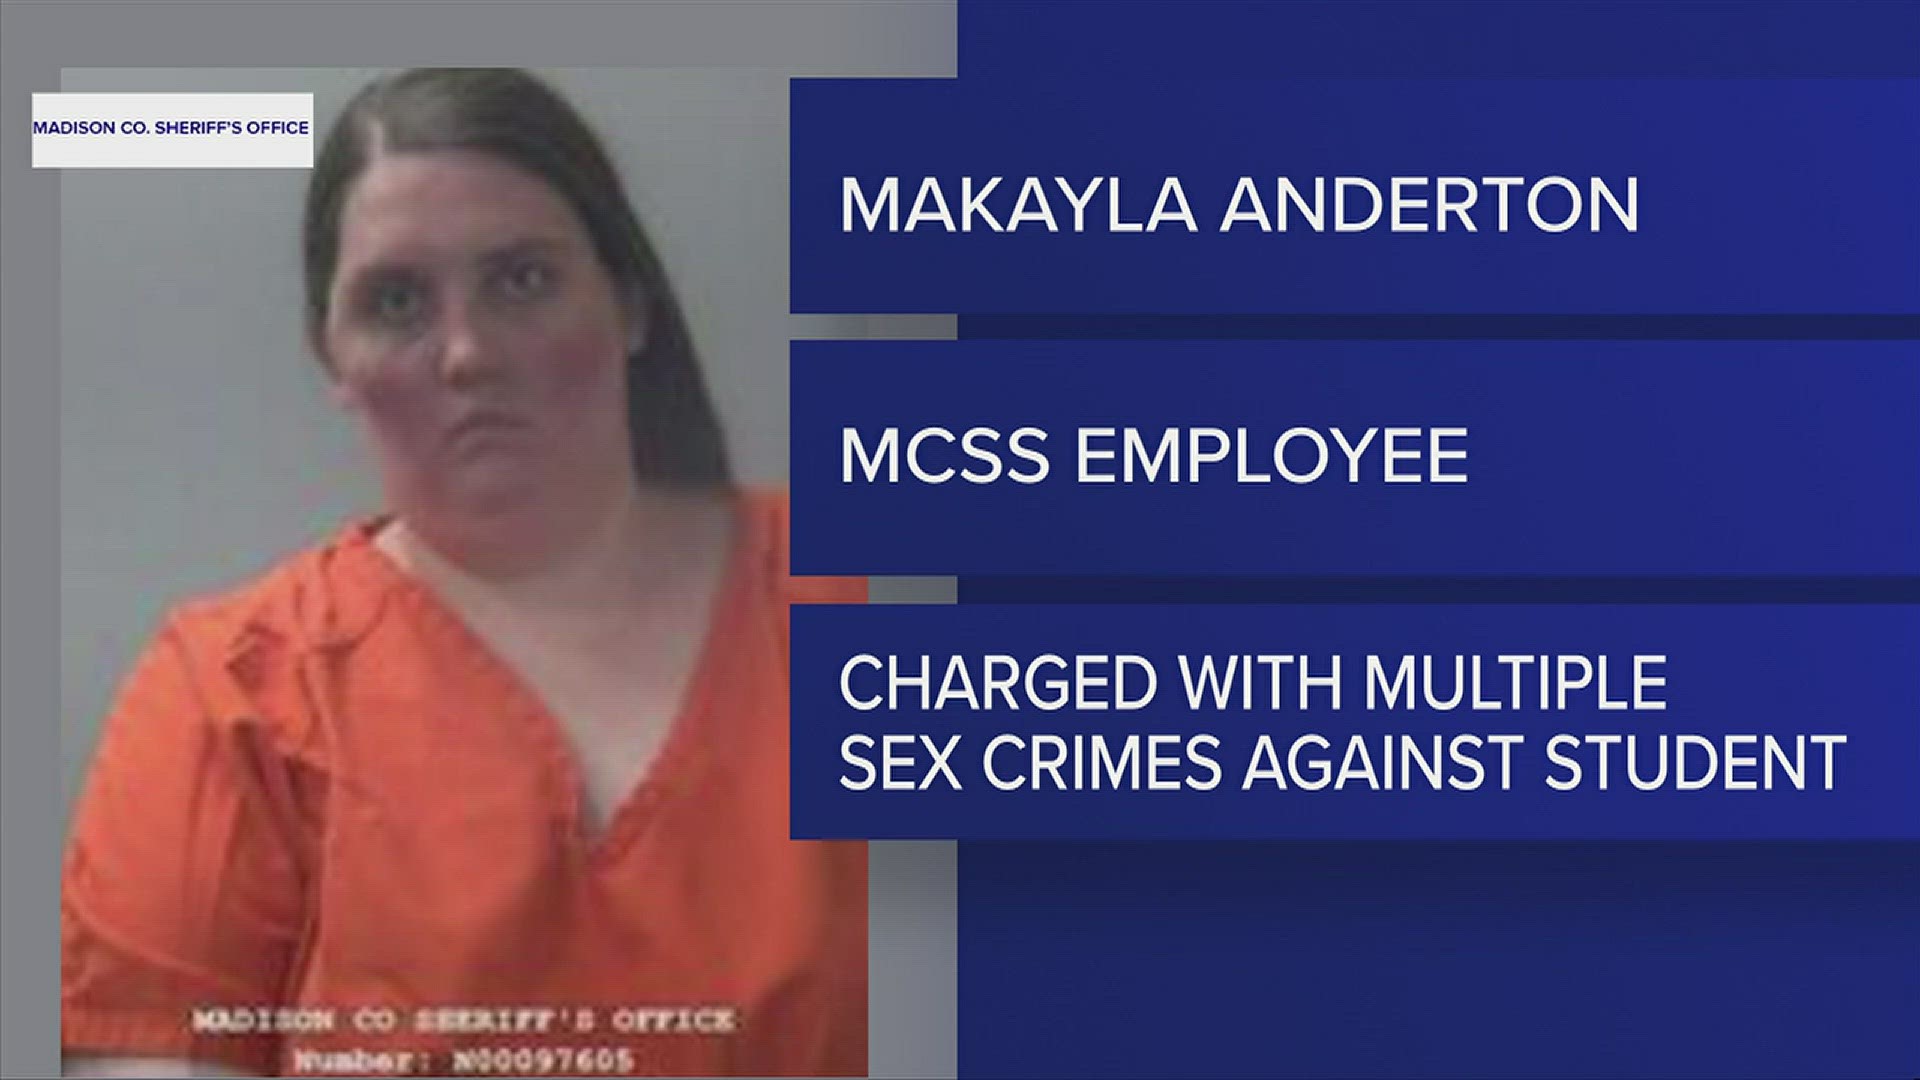 Officials say Makayla Anderton was having sexual contact with a minor, a student in the Madison County School System. Her employment with the district has ended.